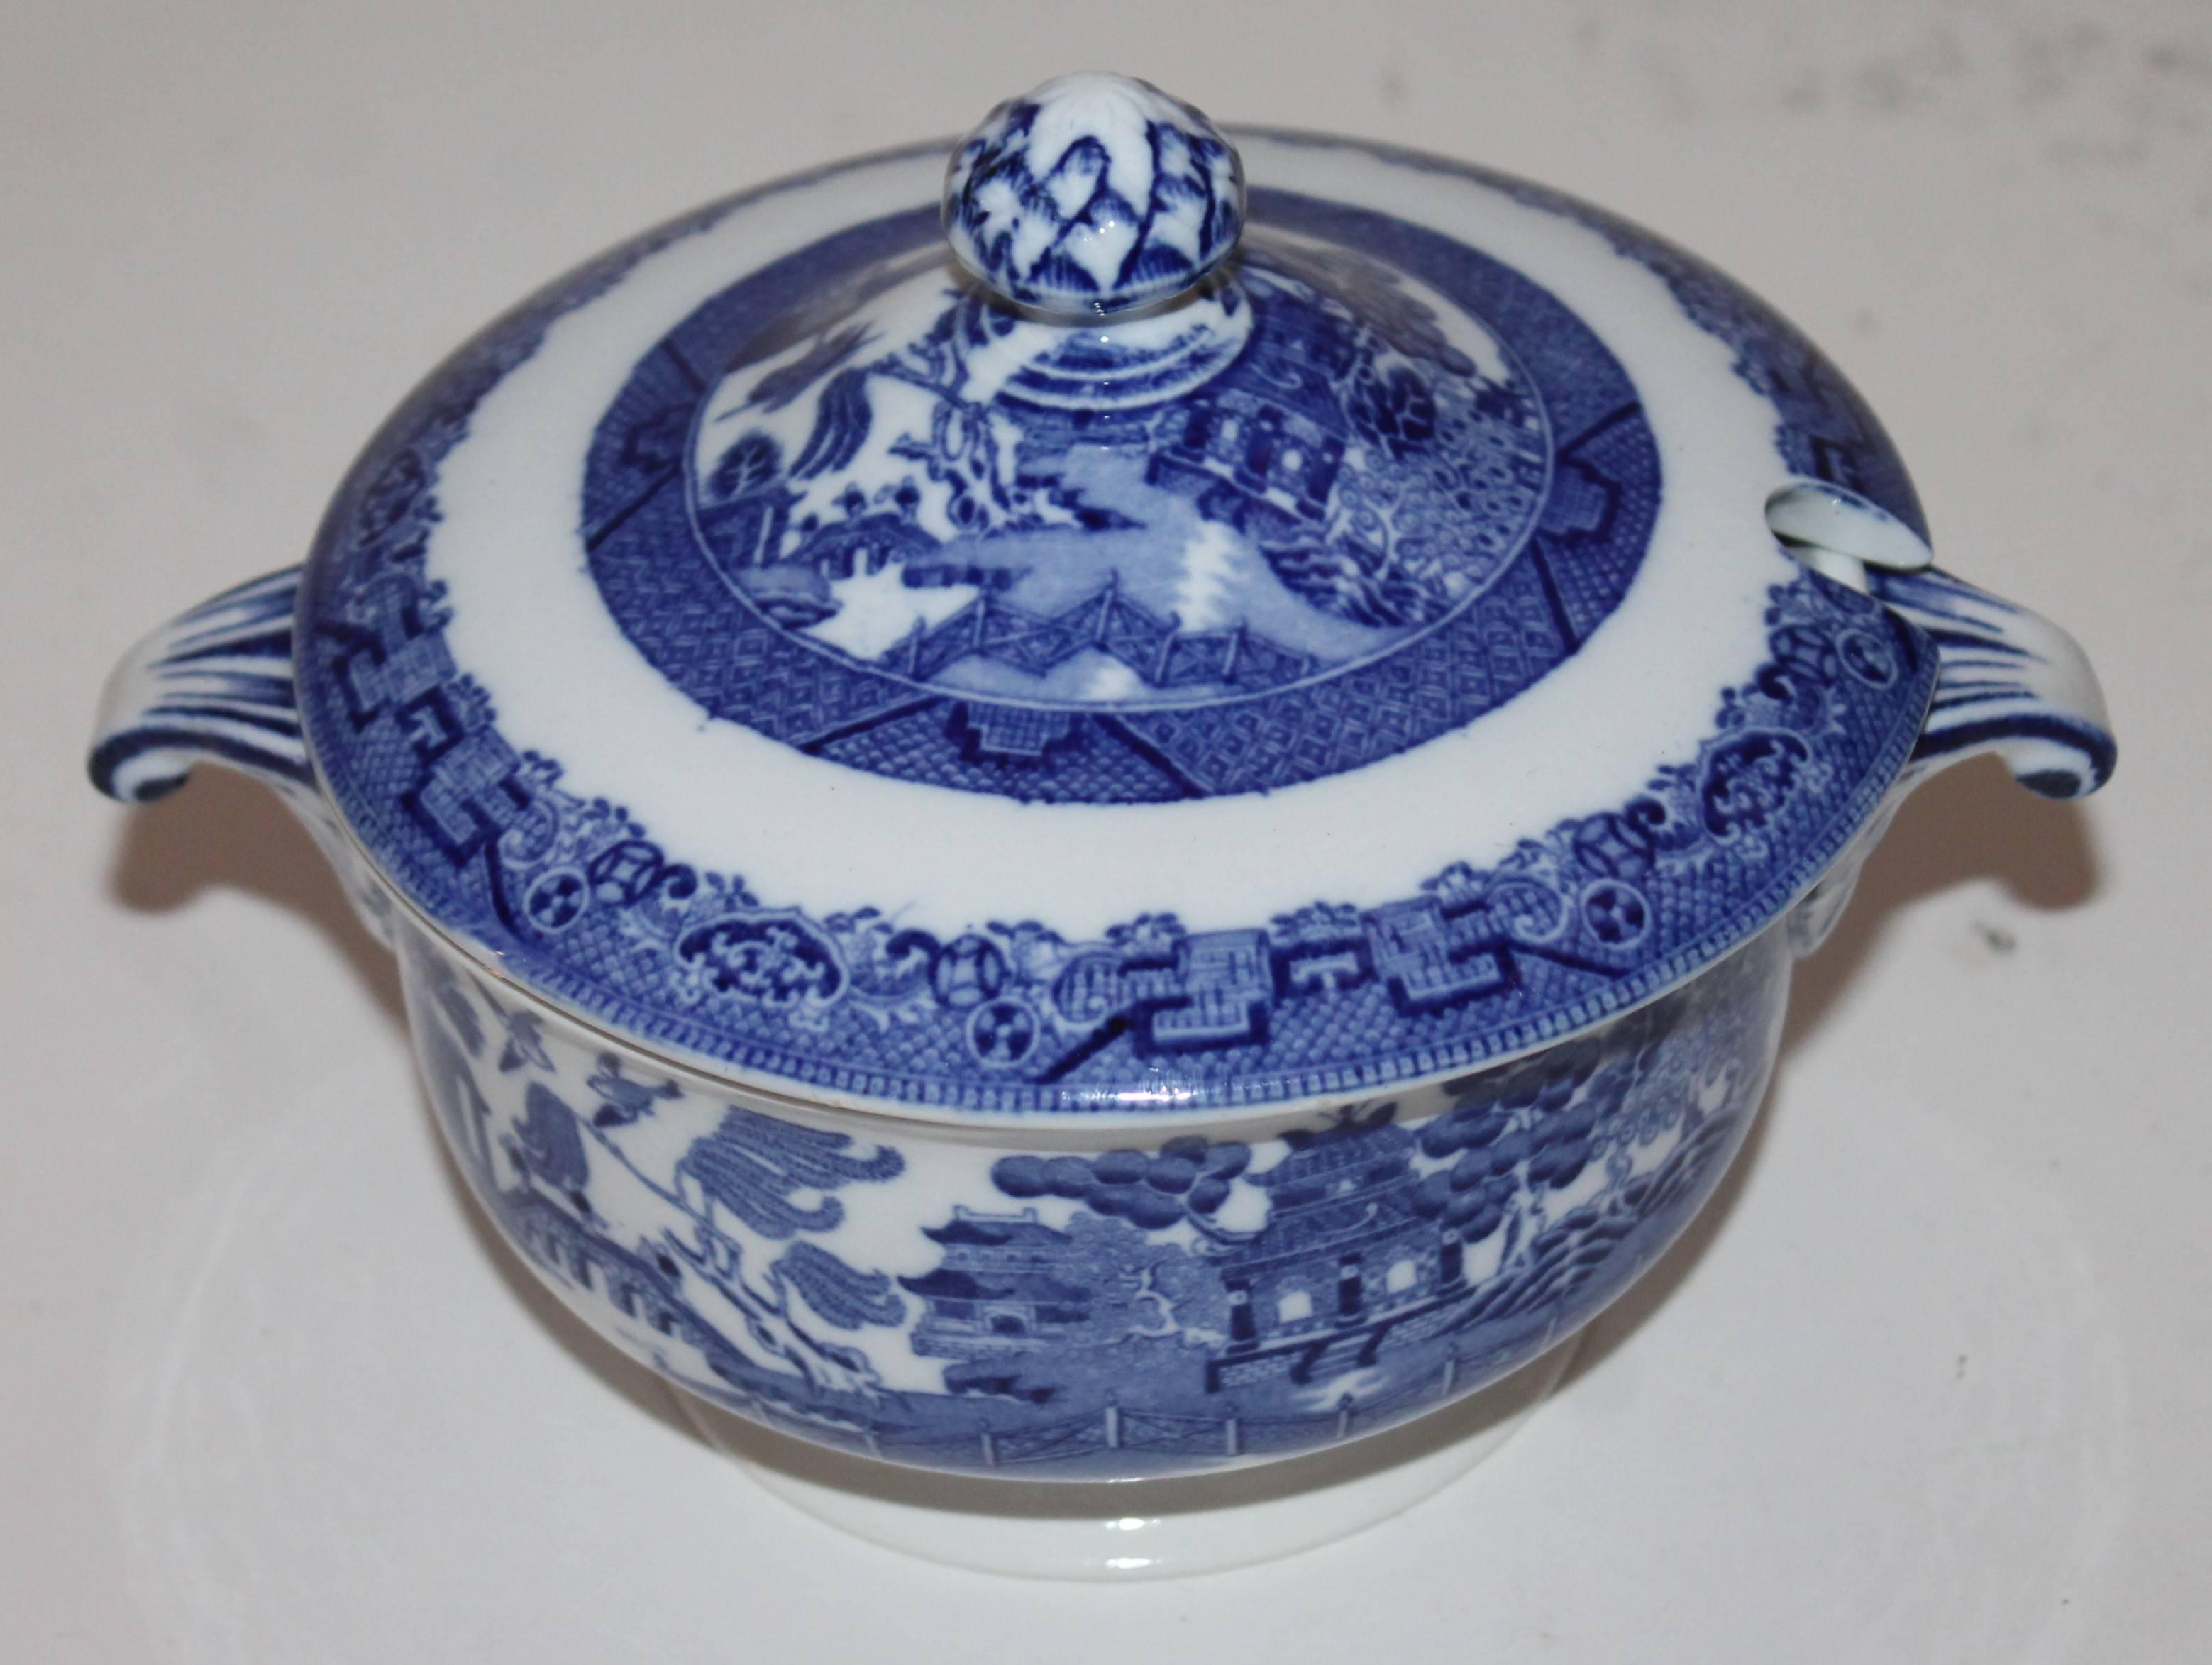 Beautiful blue willow serving dish lidded with finial in amazing condition. This serving dish is stamped Mintons.

